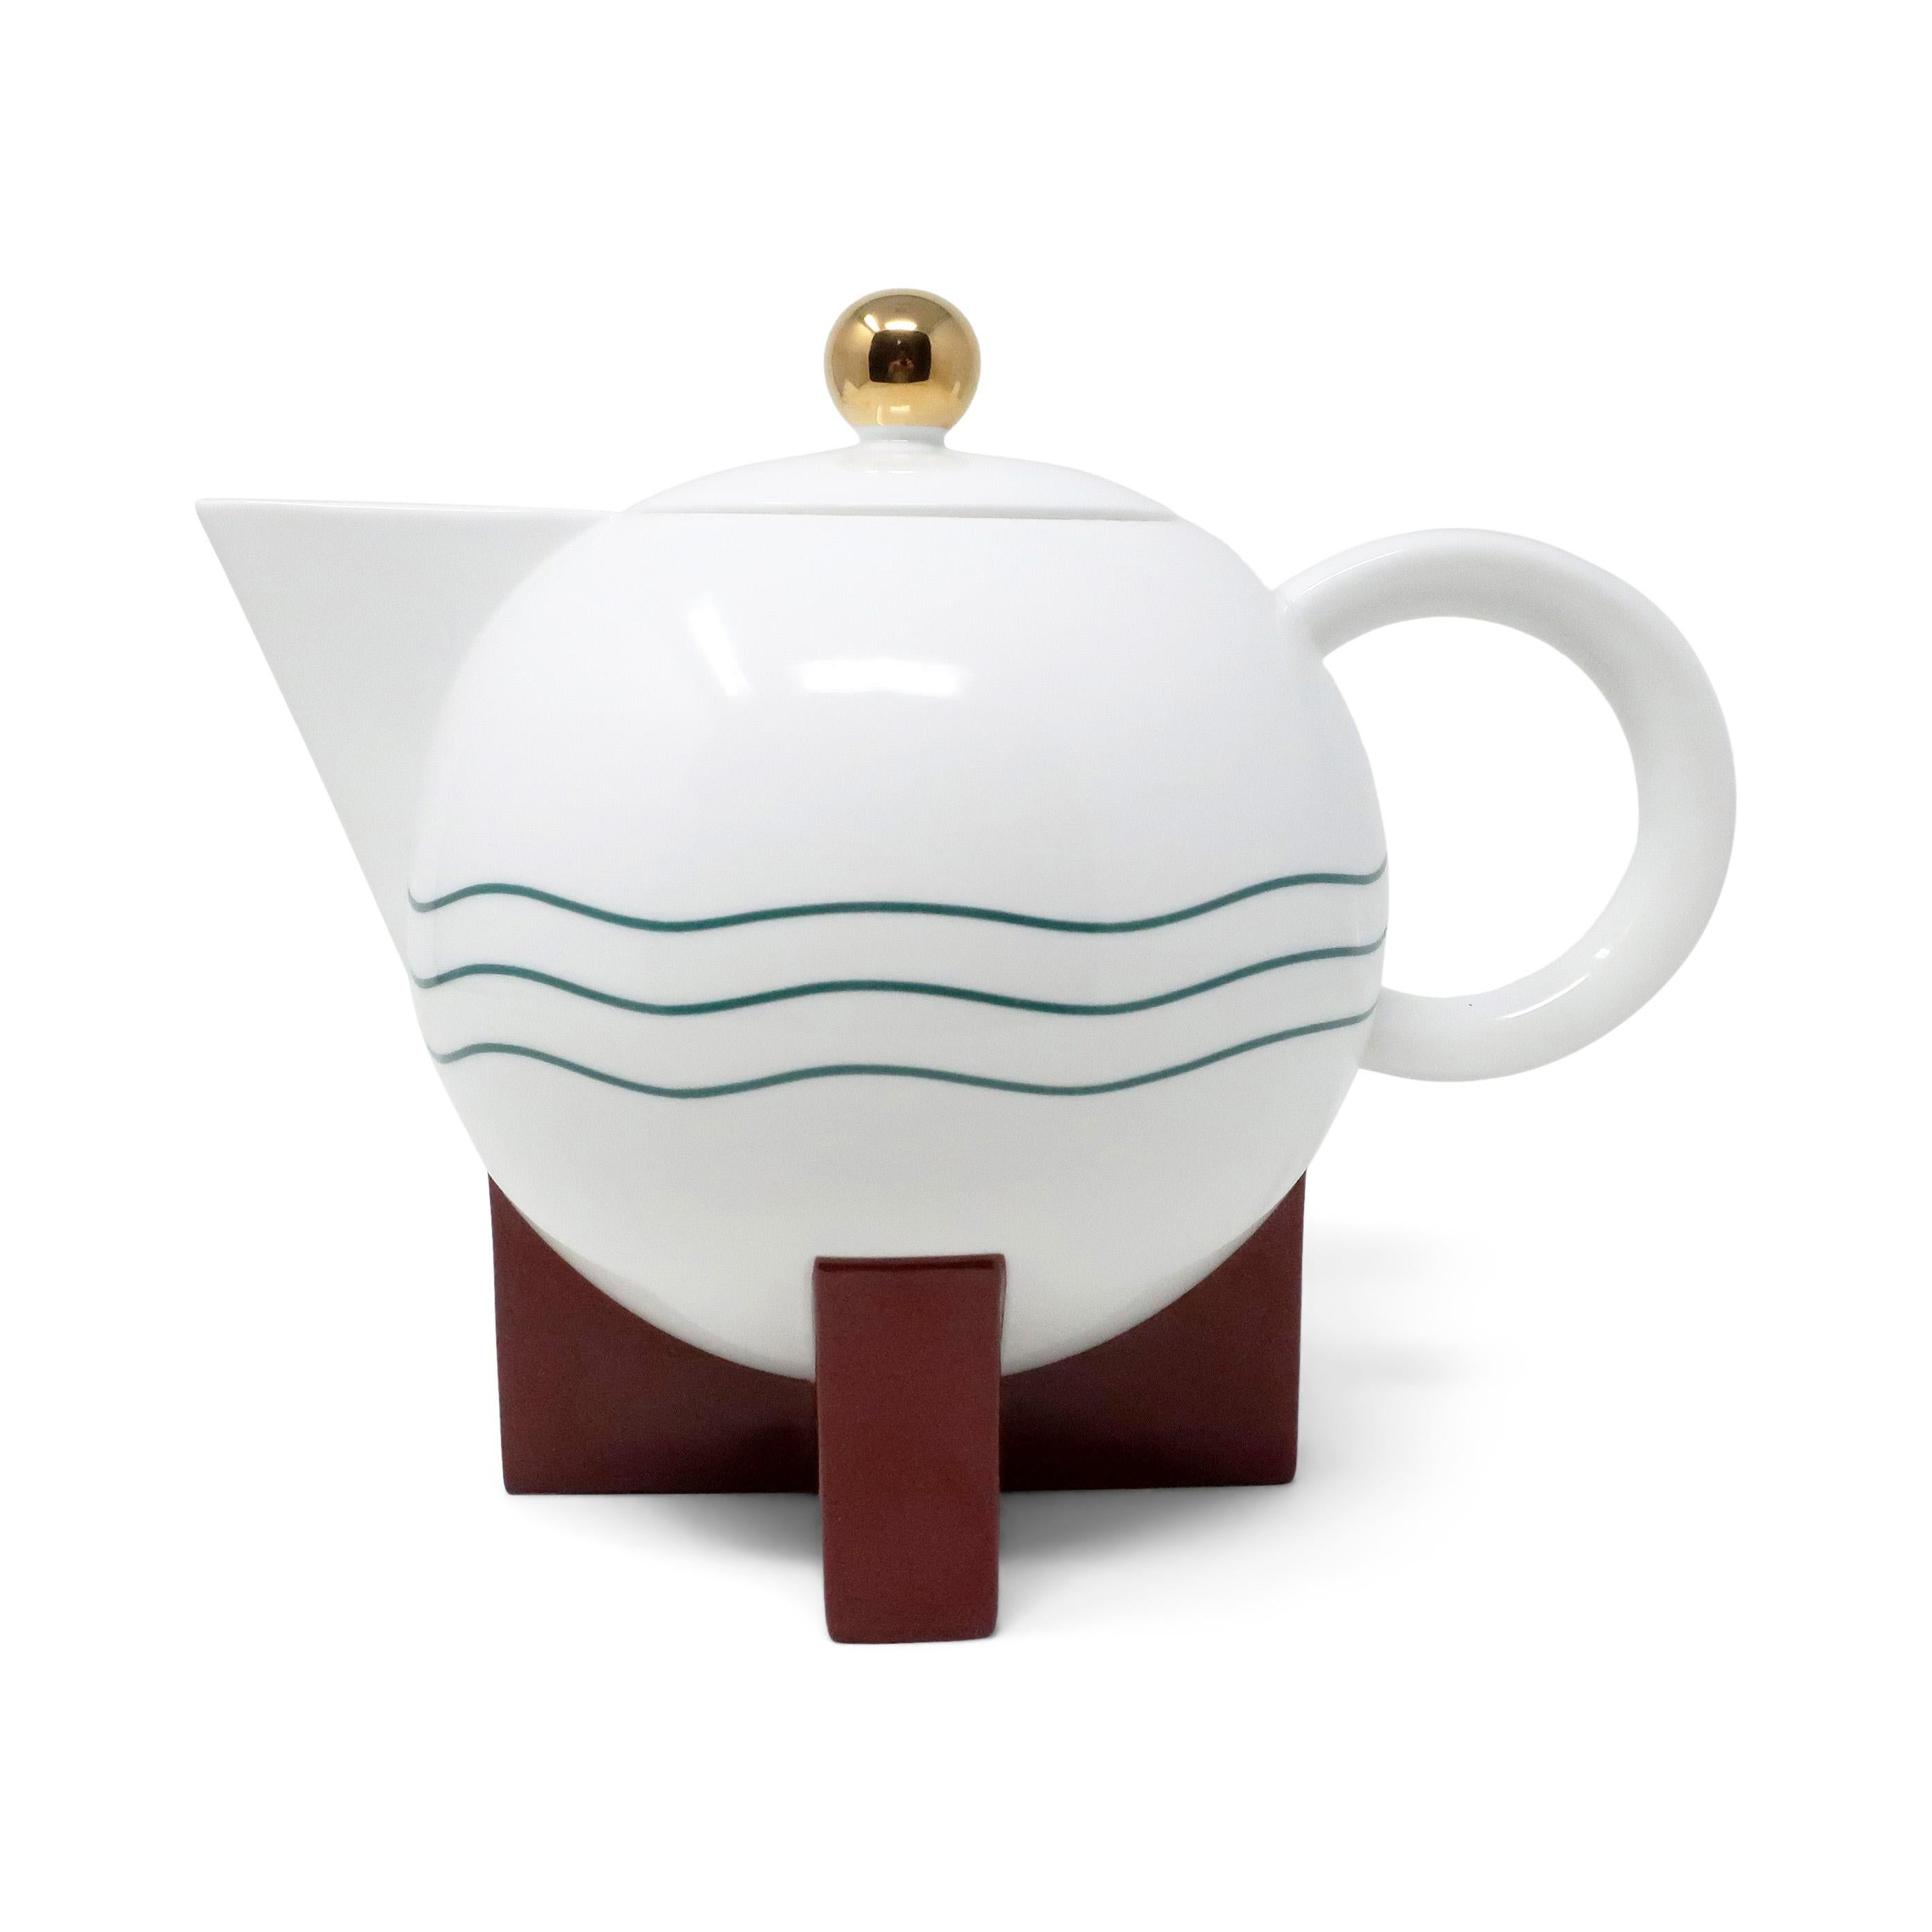 Perhaps Michael Graves’ (1934-2015) most well-known design for Swid Powell, The Big Dripper (1986) is a 14 cup coffee pot born from Graves’ preference for drip coffee and a lack of available drip coffee makers that met his aesthetic standards. High